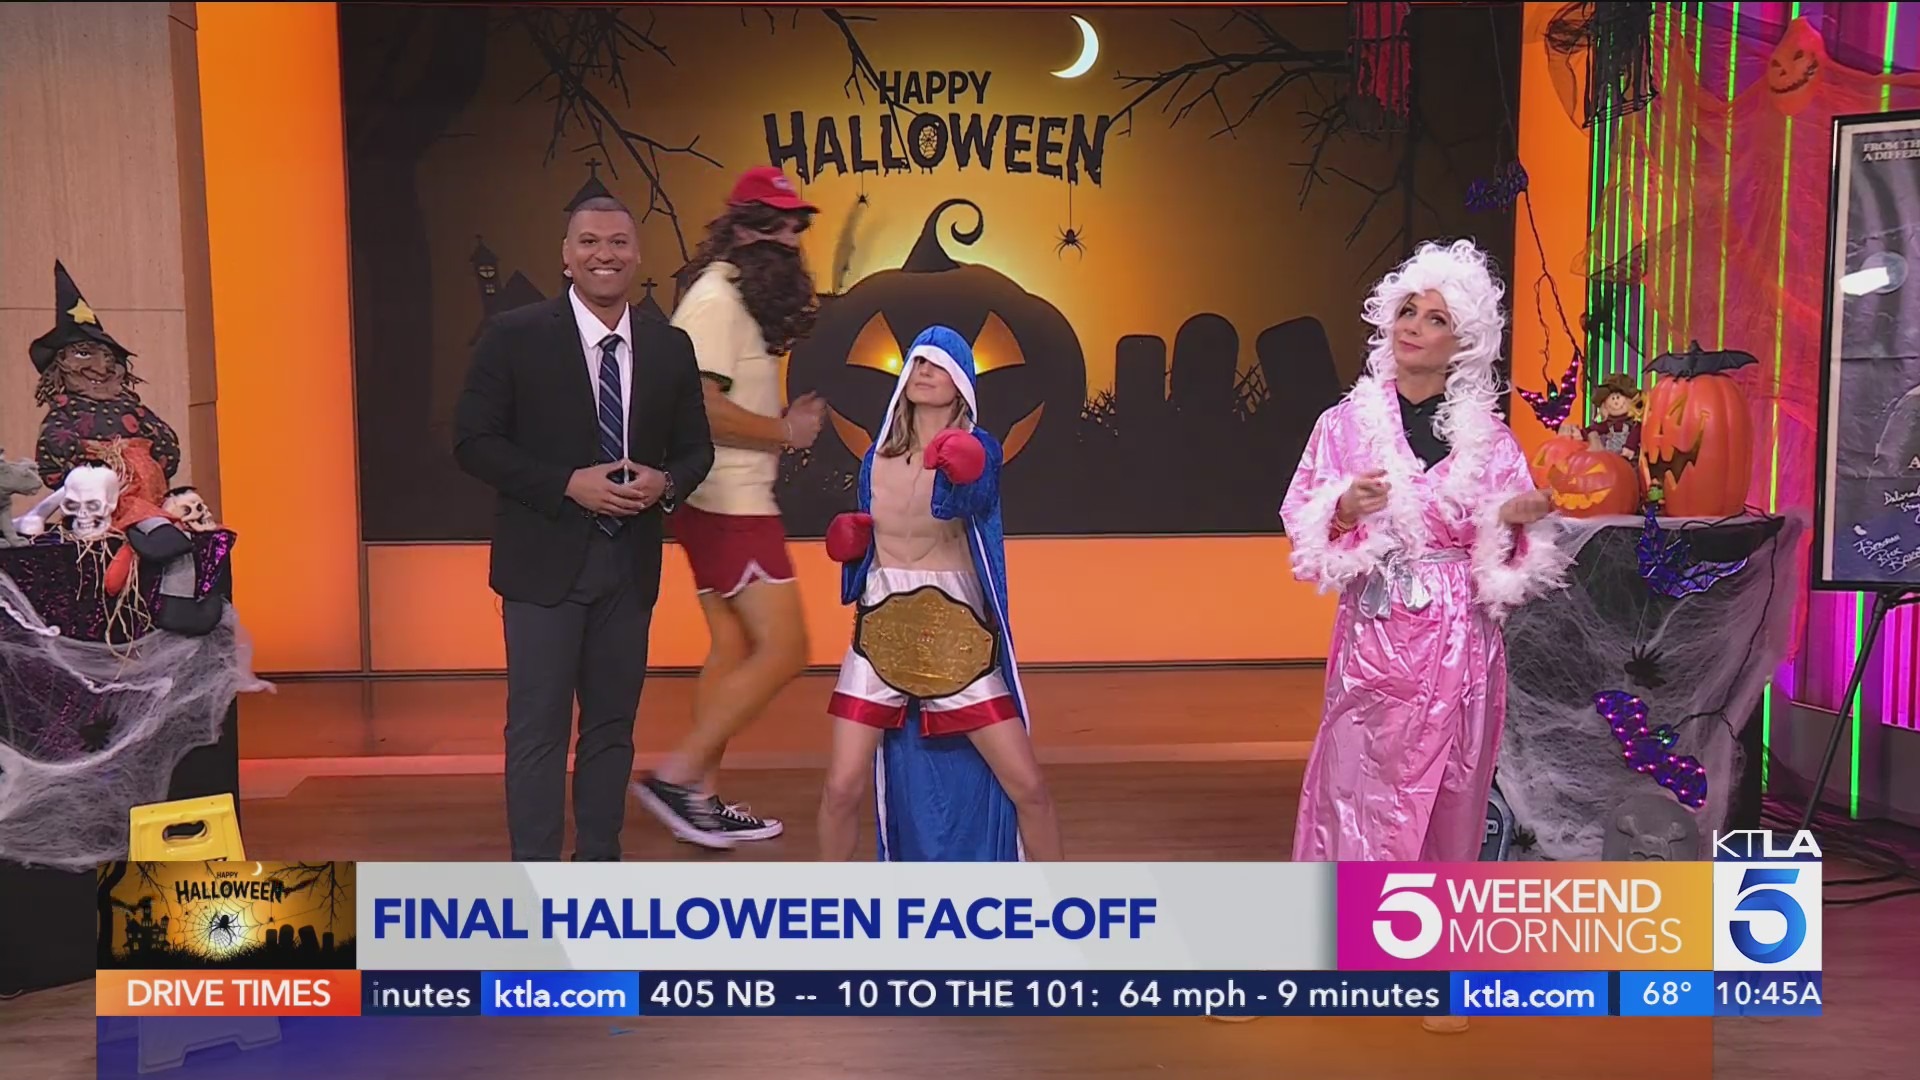 Final weekend Halloween costume revealed as pro wrestlers of morning news